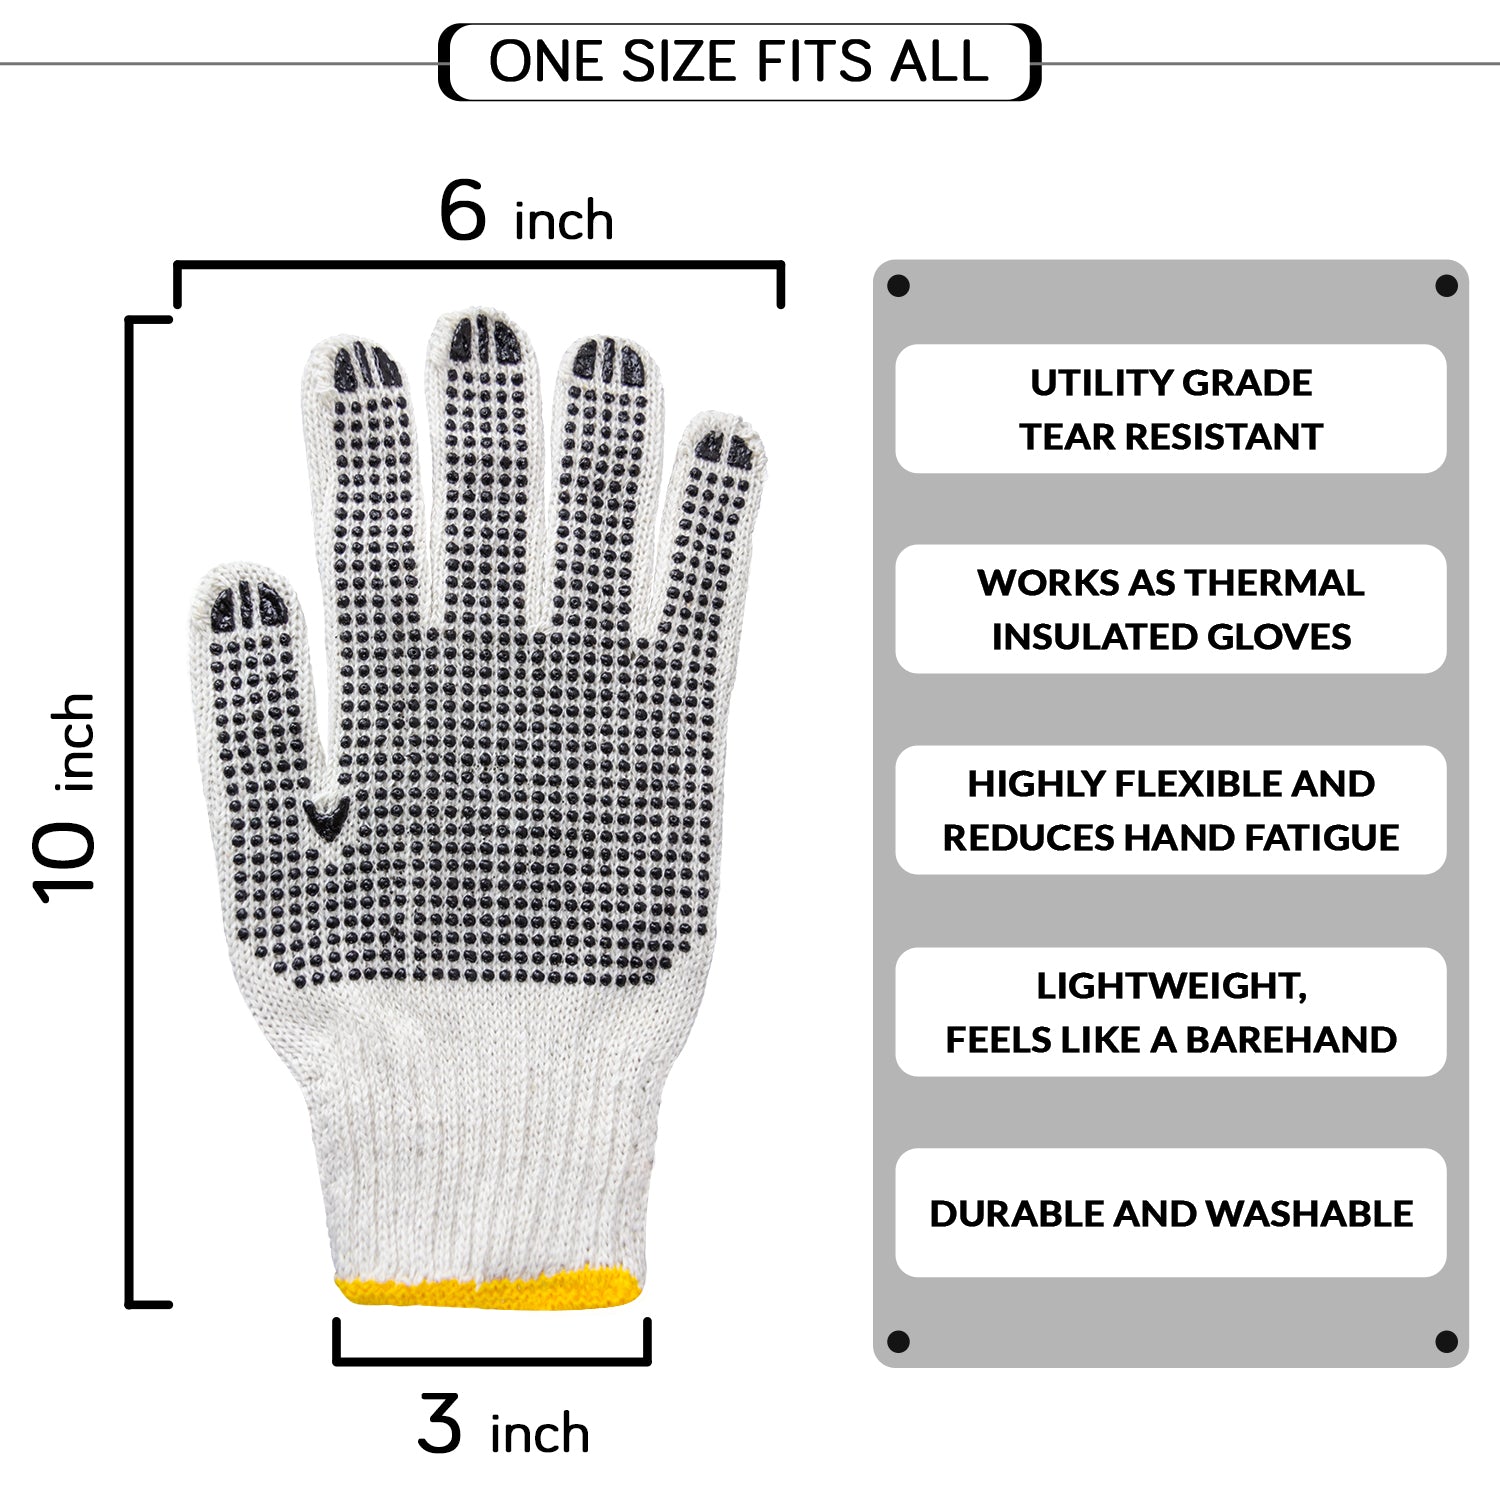 [12 Pairs] Black White Work Gloves - Dotted Safety Working Gloves, Firm Grip, Slip Resistant, Heavy Duty Cotton Knit for Men Women, Utility, Construction, Gardening, Fishing, Winter Indoor Outdoor Use